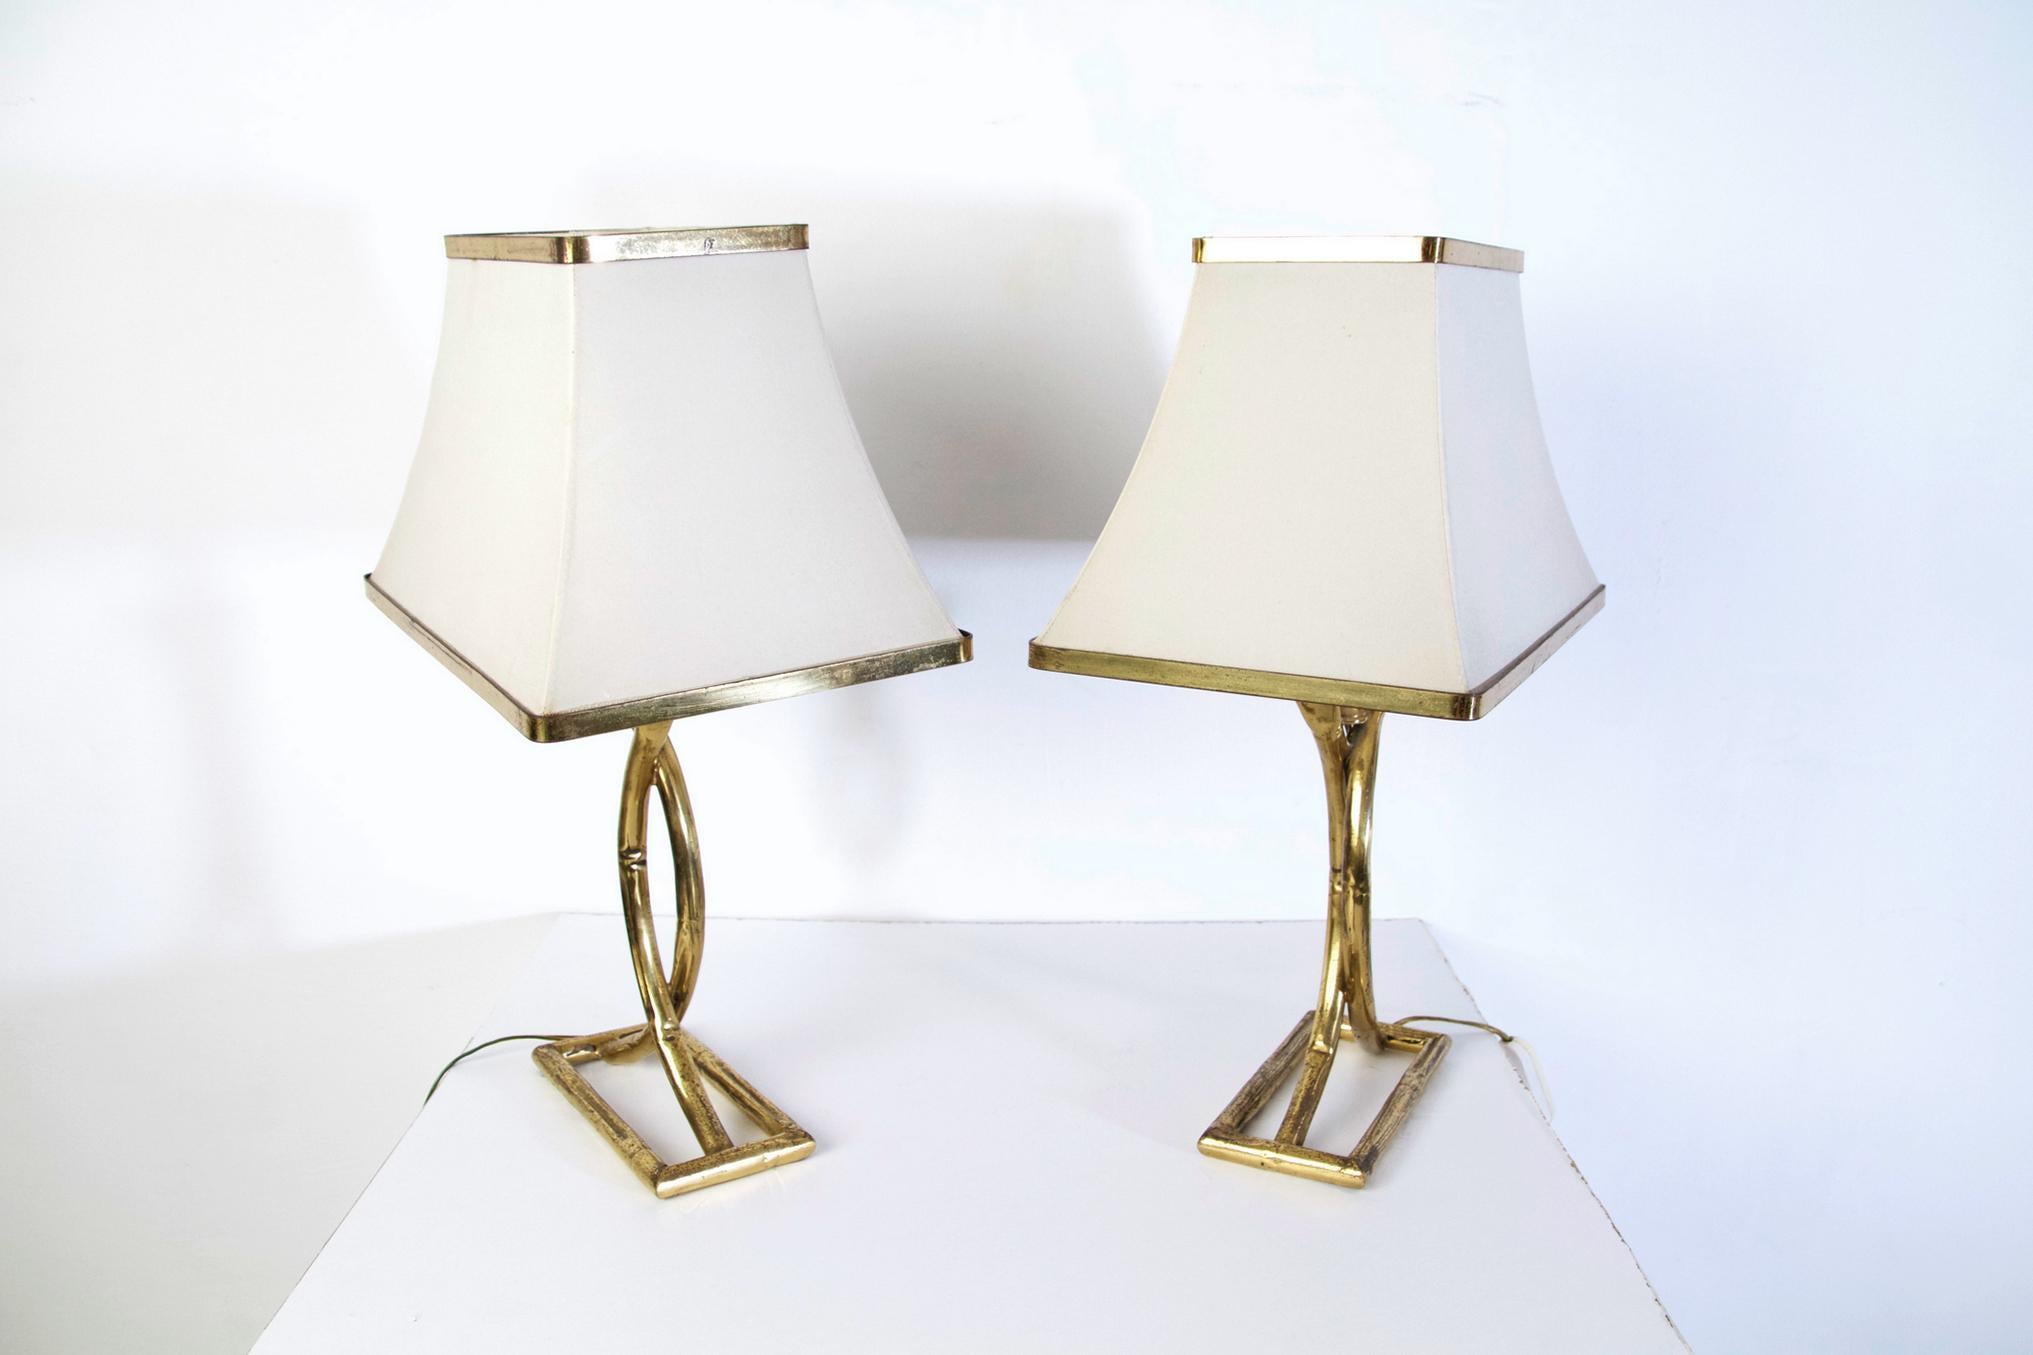 Pair of nice vintage table lamps in brass bamboo imitation with rectangular bases and white pagoda shaped white lampshades. There is patina on the brass which can be polished to shine even more.